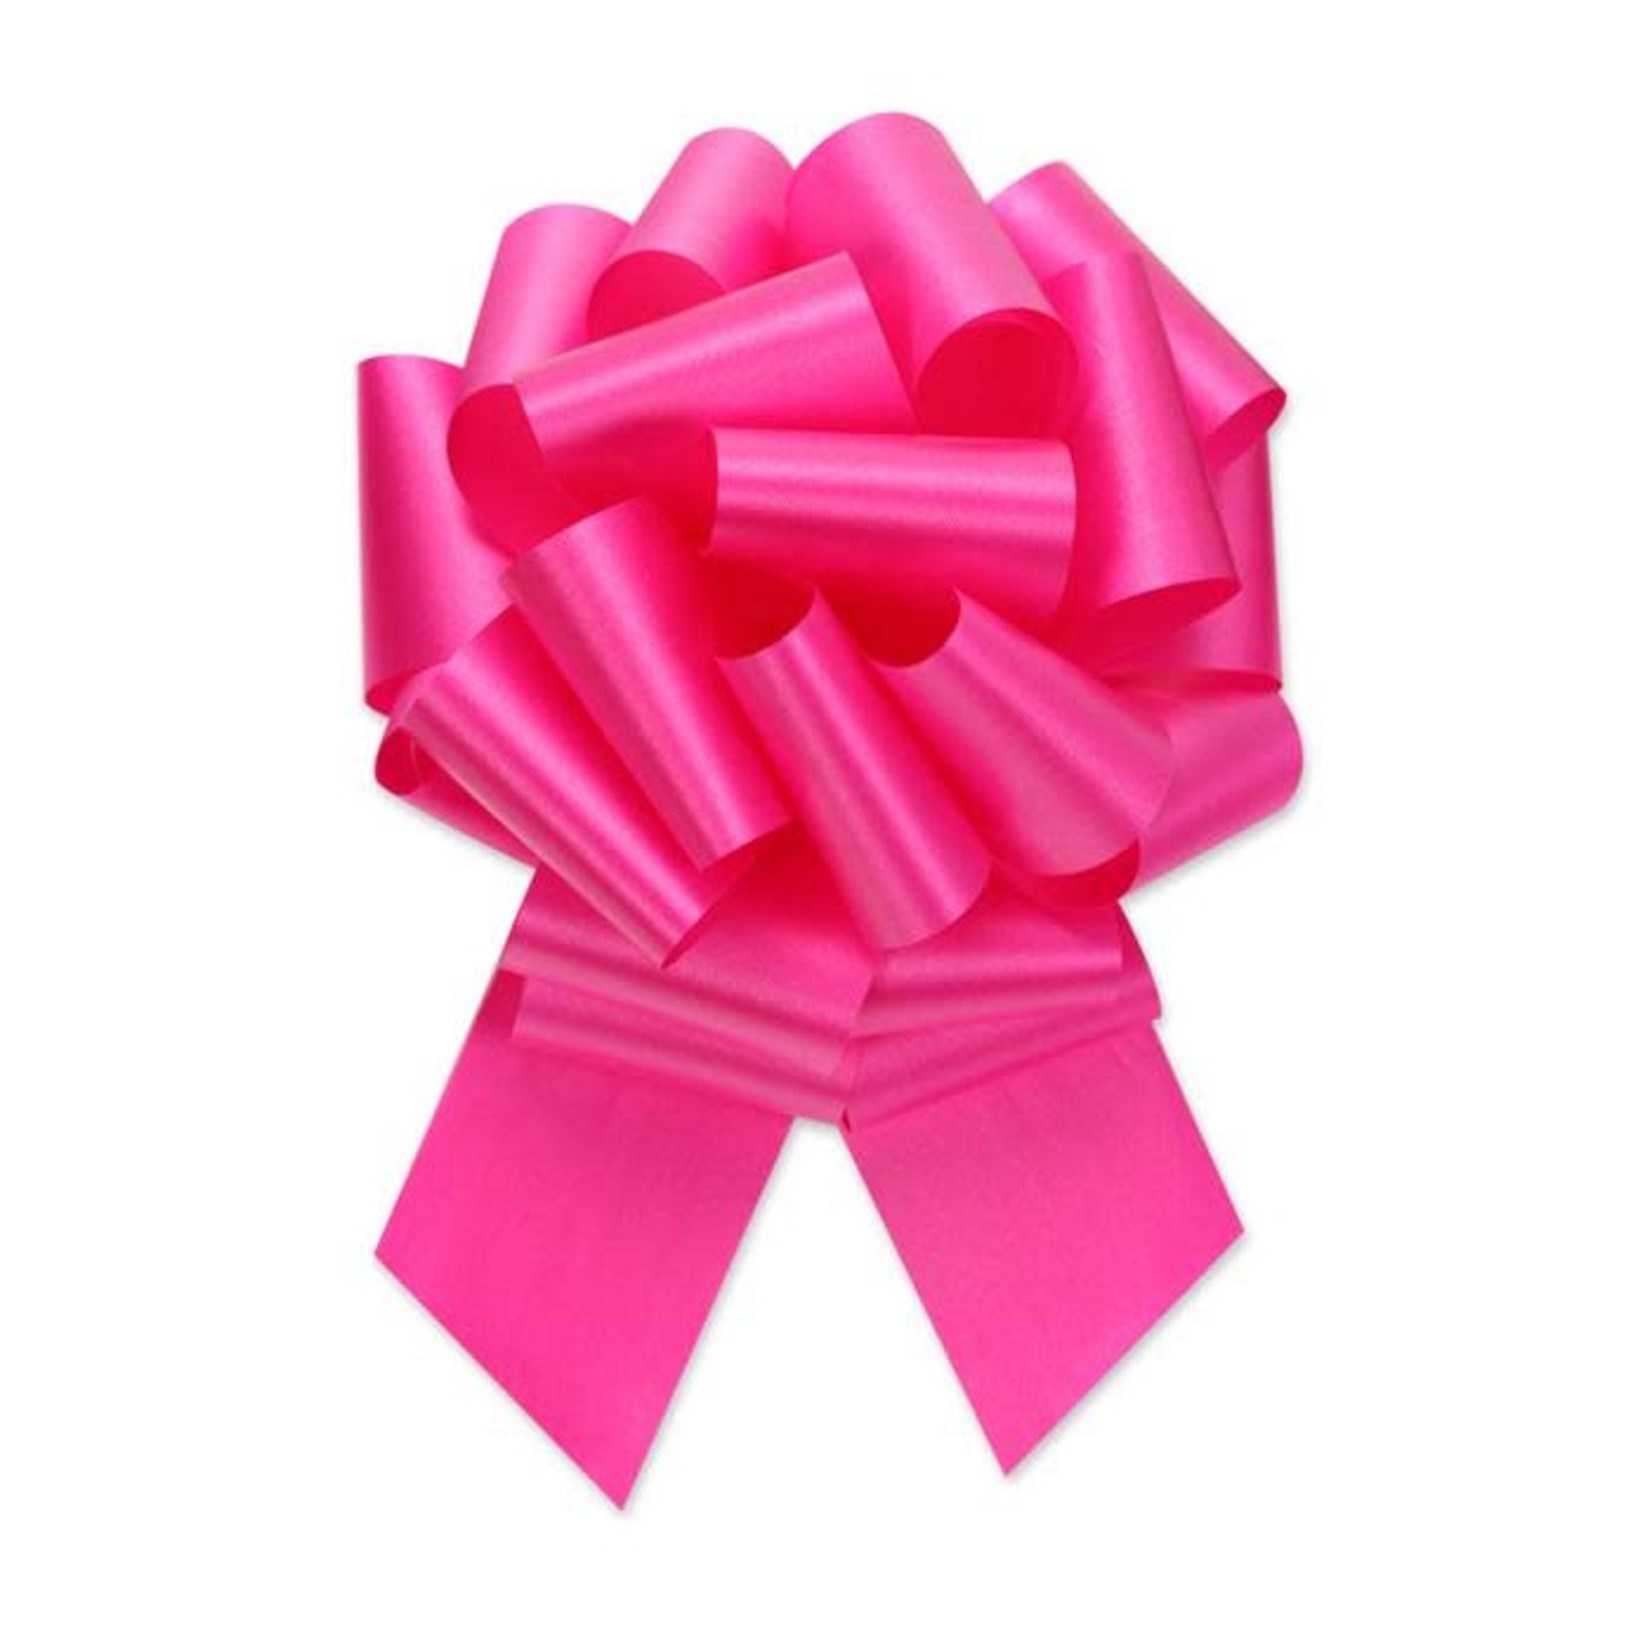 PERFECT BOW  #5 BEAUTY, 7/8" ribbon width, 4" bow size, 18 loops